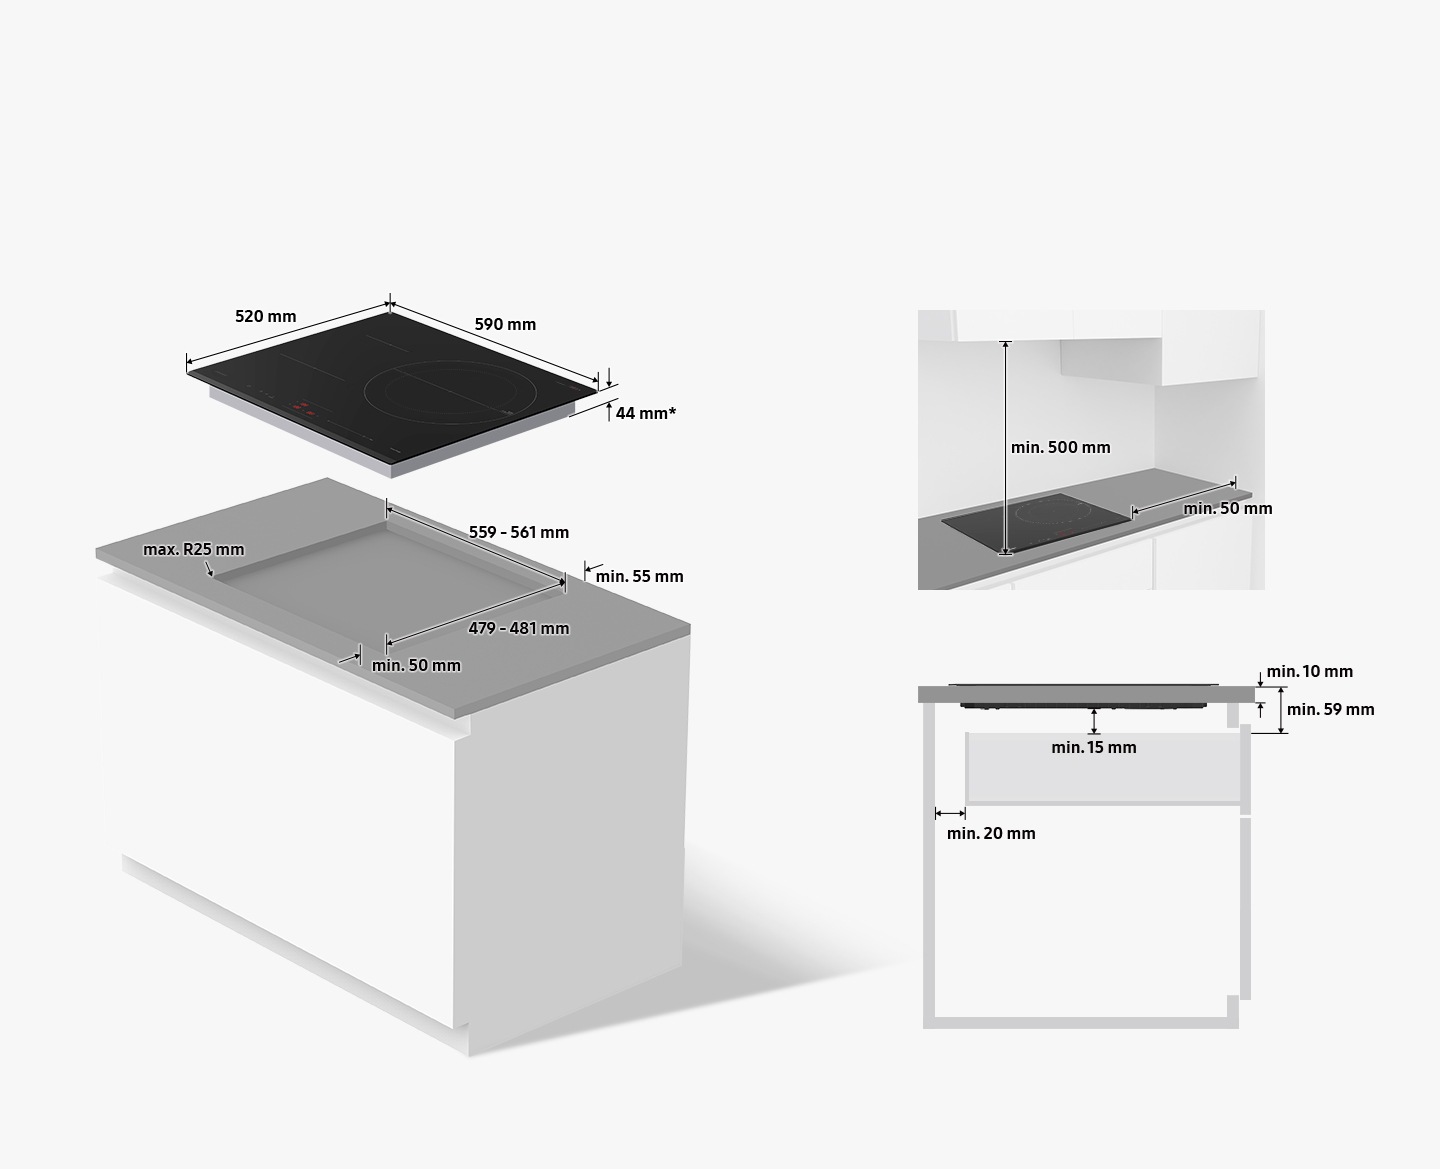 The cooktop measures 590mm wide, 520mm deep, and 44mm* high. The 44mm* height must fit inside the countertop cutout. Countertop cutouts must be 559-561mm wide, 479-481mm deep, and maximum R25mm round corners. There must be minimum 55mm of uncut space on the back of the cutout and minimum 50mm of uncut space on the front of the cutout. The minimum height of 15mm under the cooktop plus the minimum thickness of the countertop of 10mm must be minimum 59mm. Drawers installed under the cooktop must be minimum 20mm from the rear wall. When the cooktop is installed, there must be minimum 500mm of space above the cooktop and minimum 50mm to the right of the cooktop.